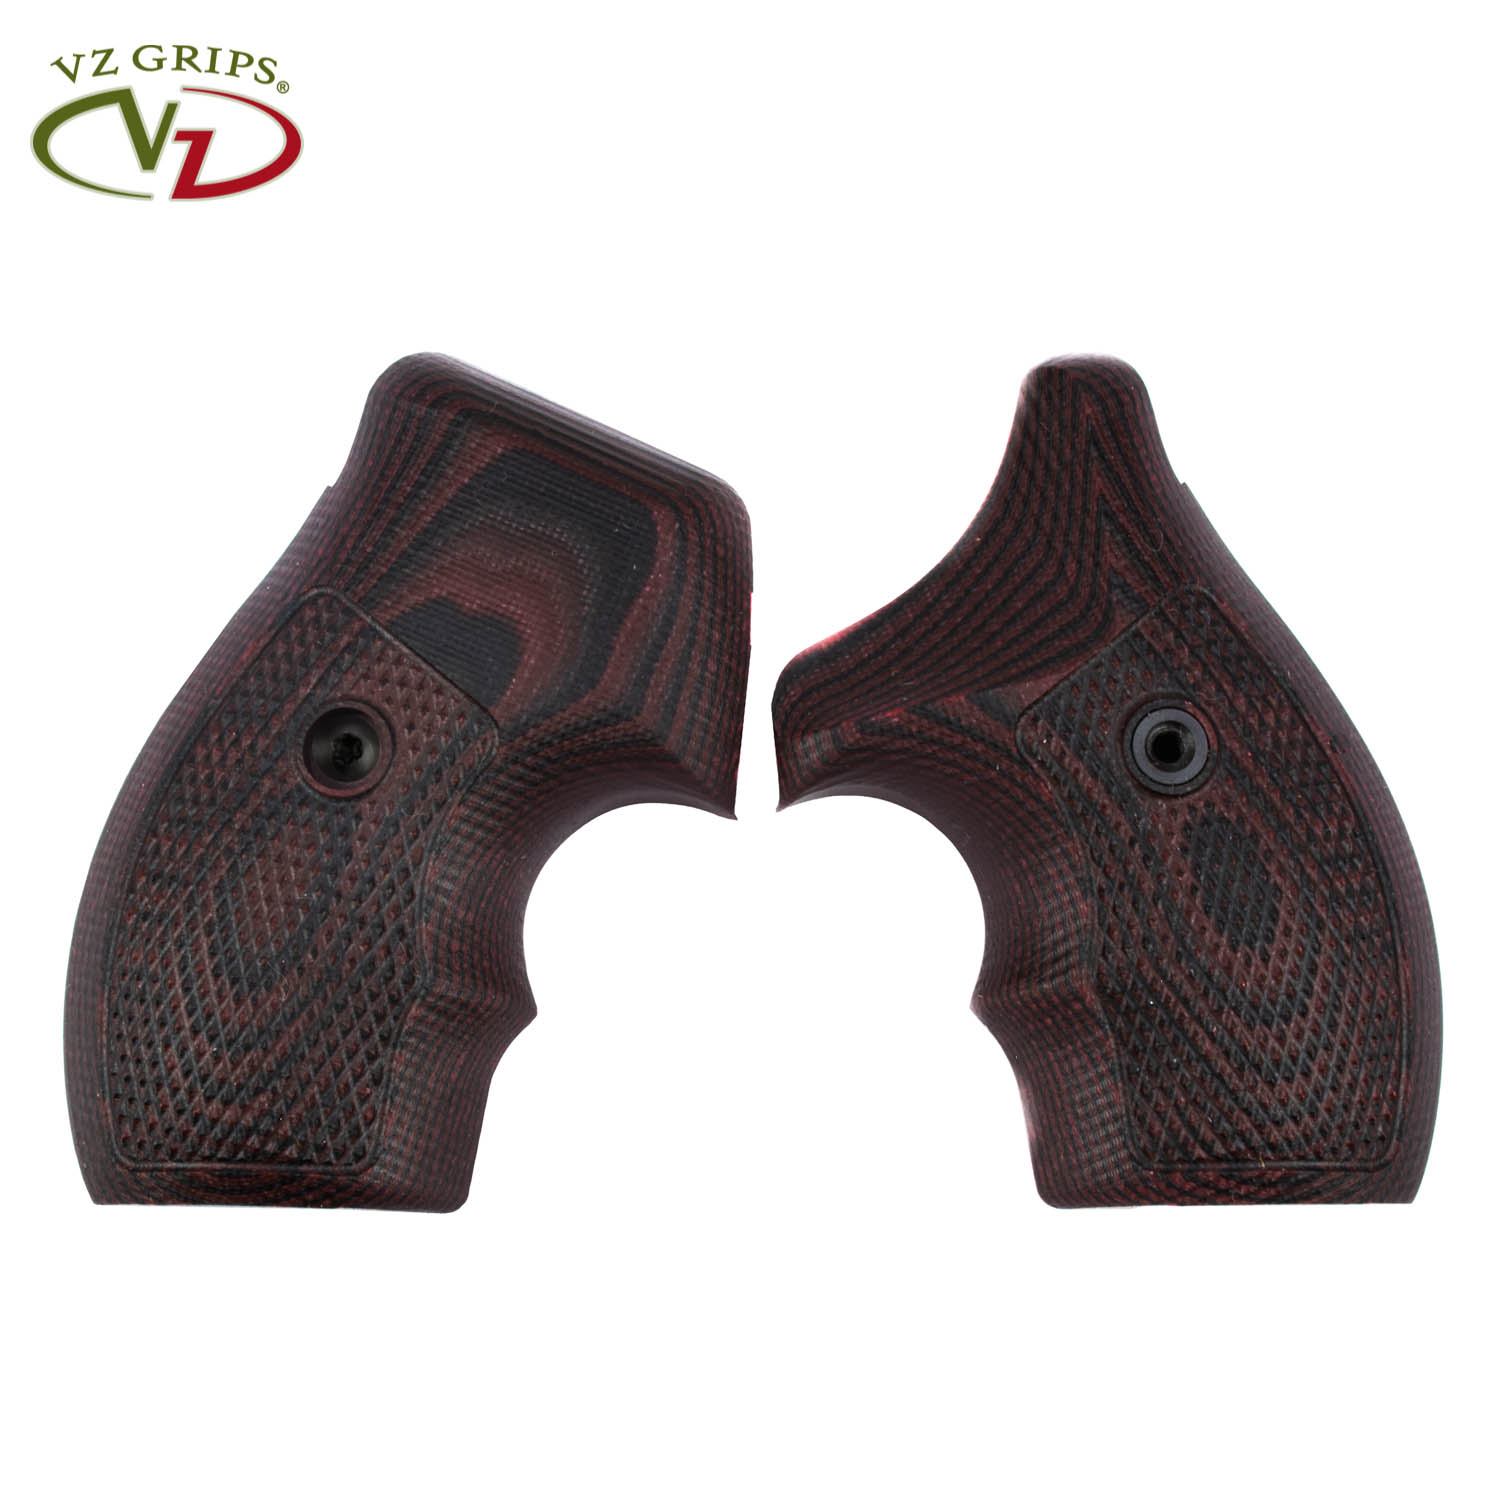 VZ Grips Smith & Wesson JFrame Tactical Diamond Grips, Black Cherry MGW